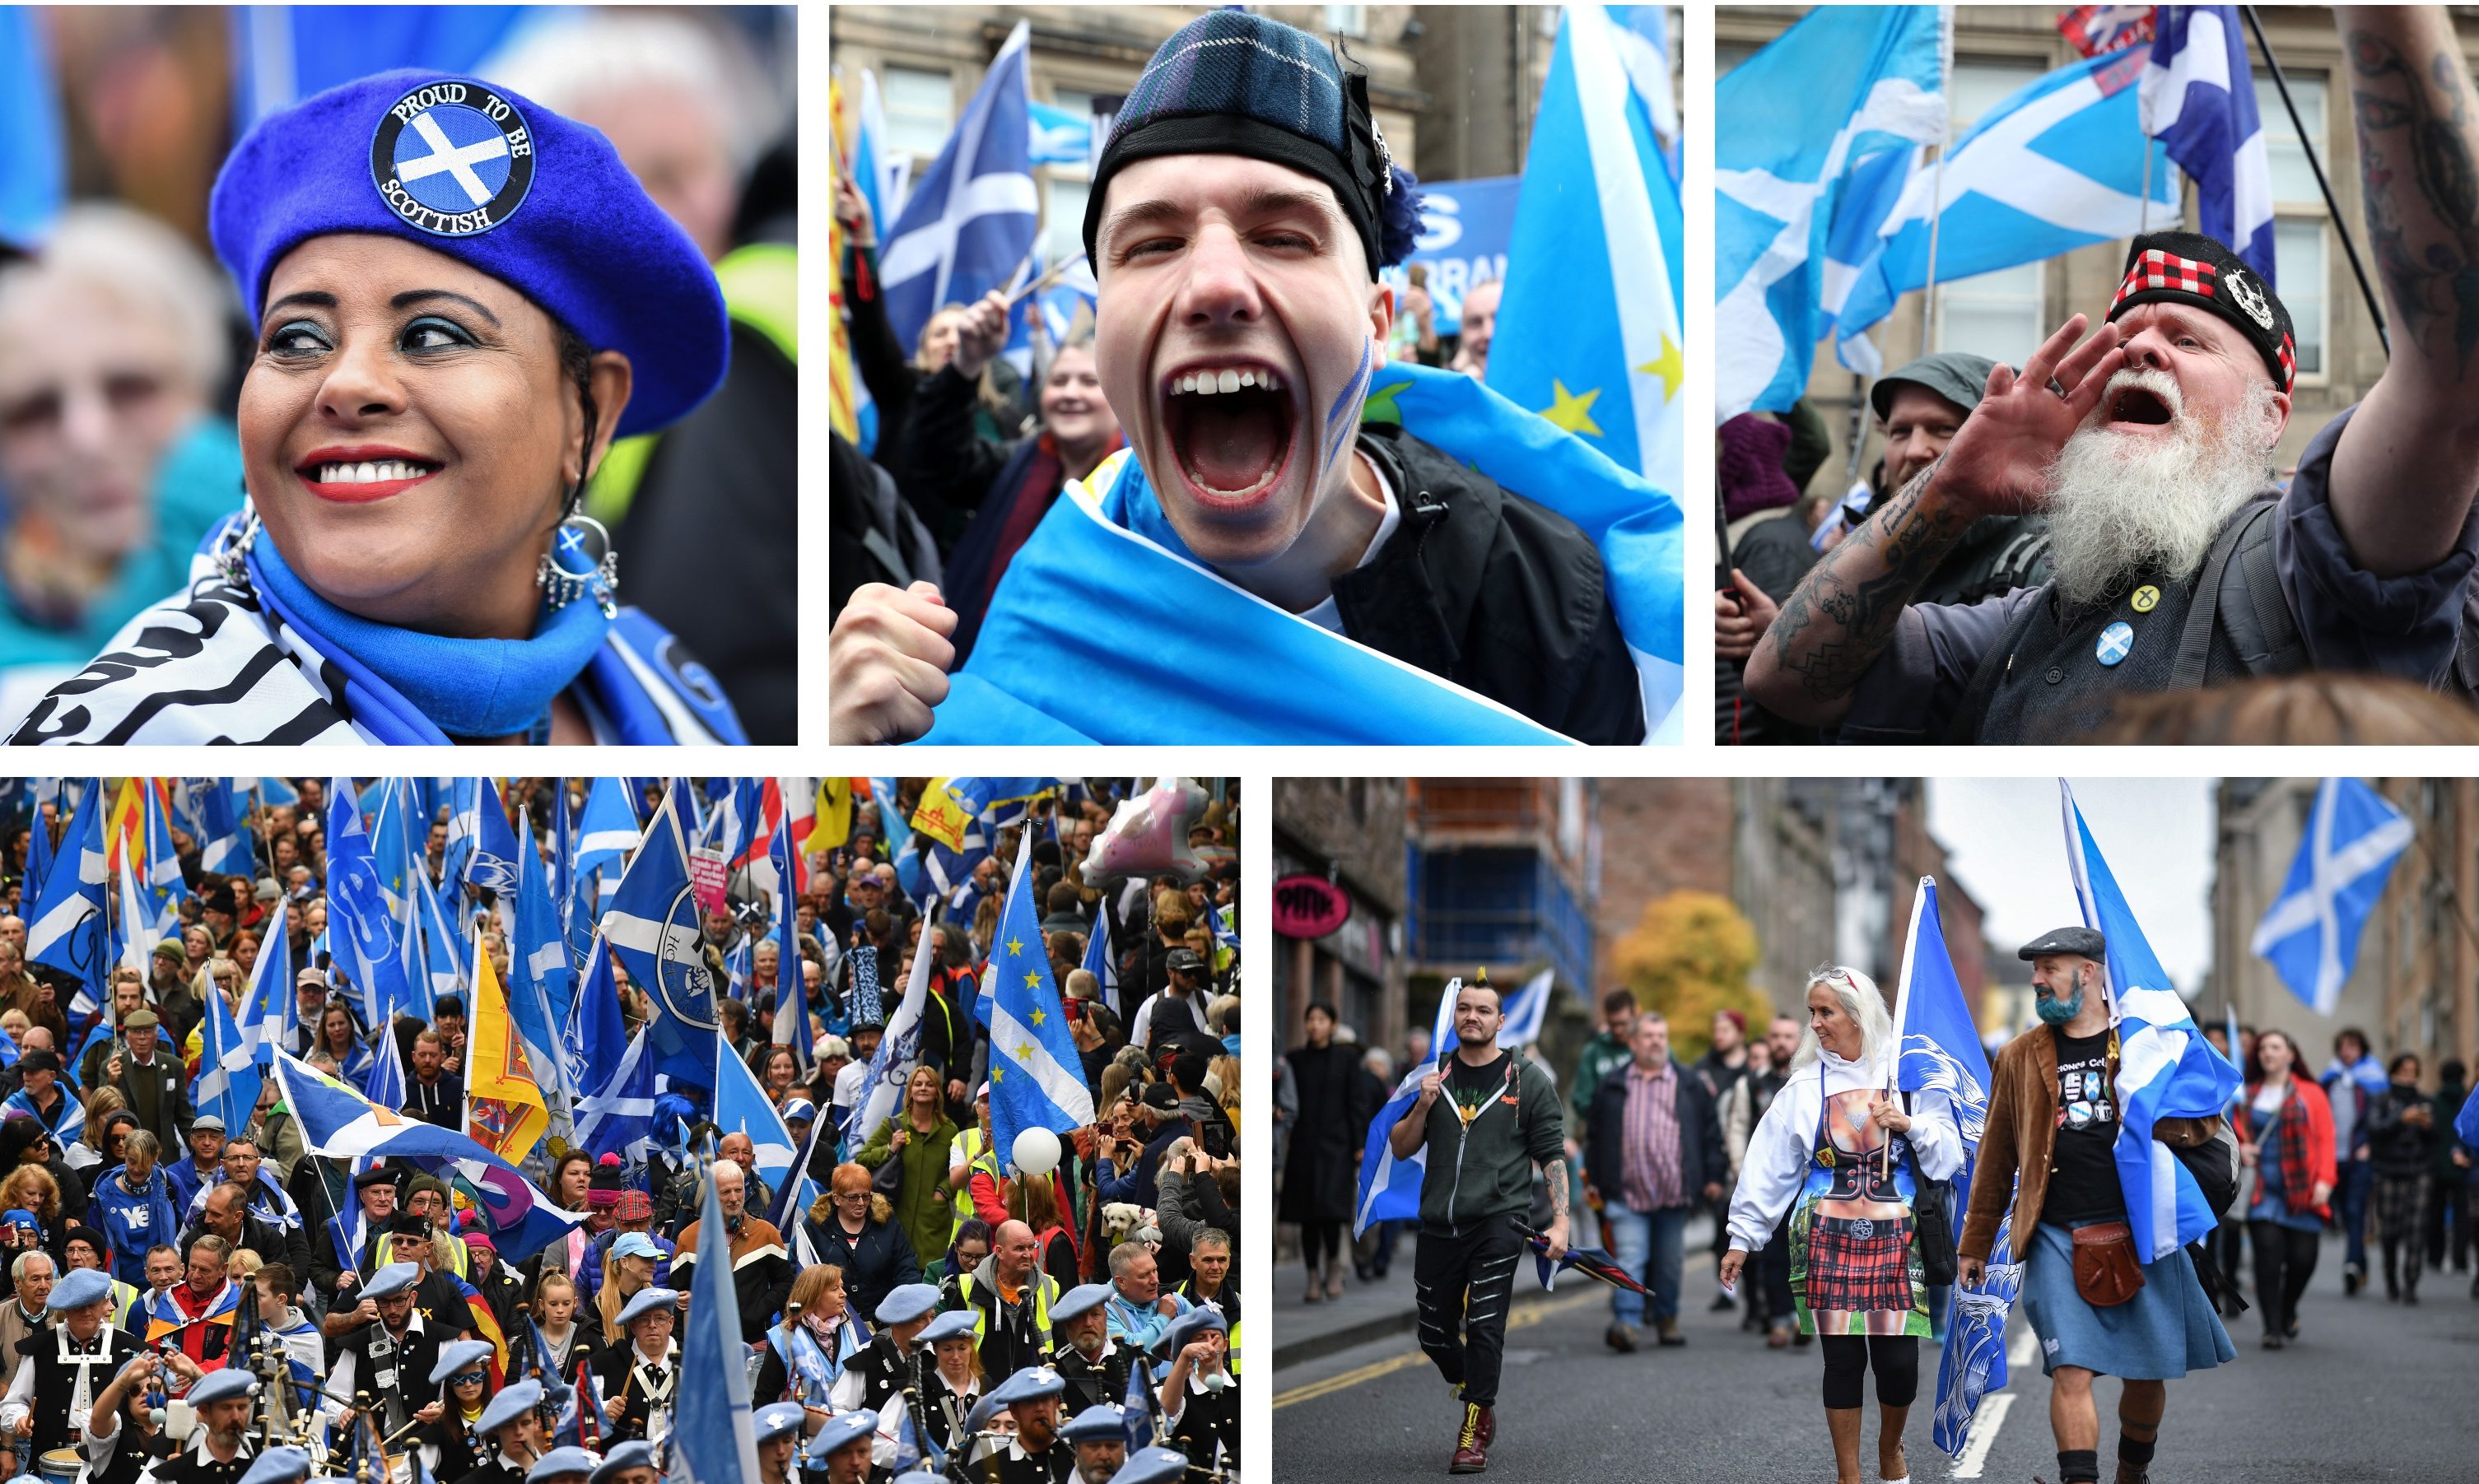 Images from an All Under One Banner march in Edinburgh.